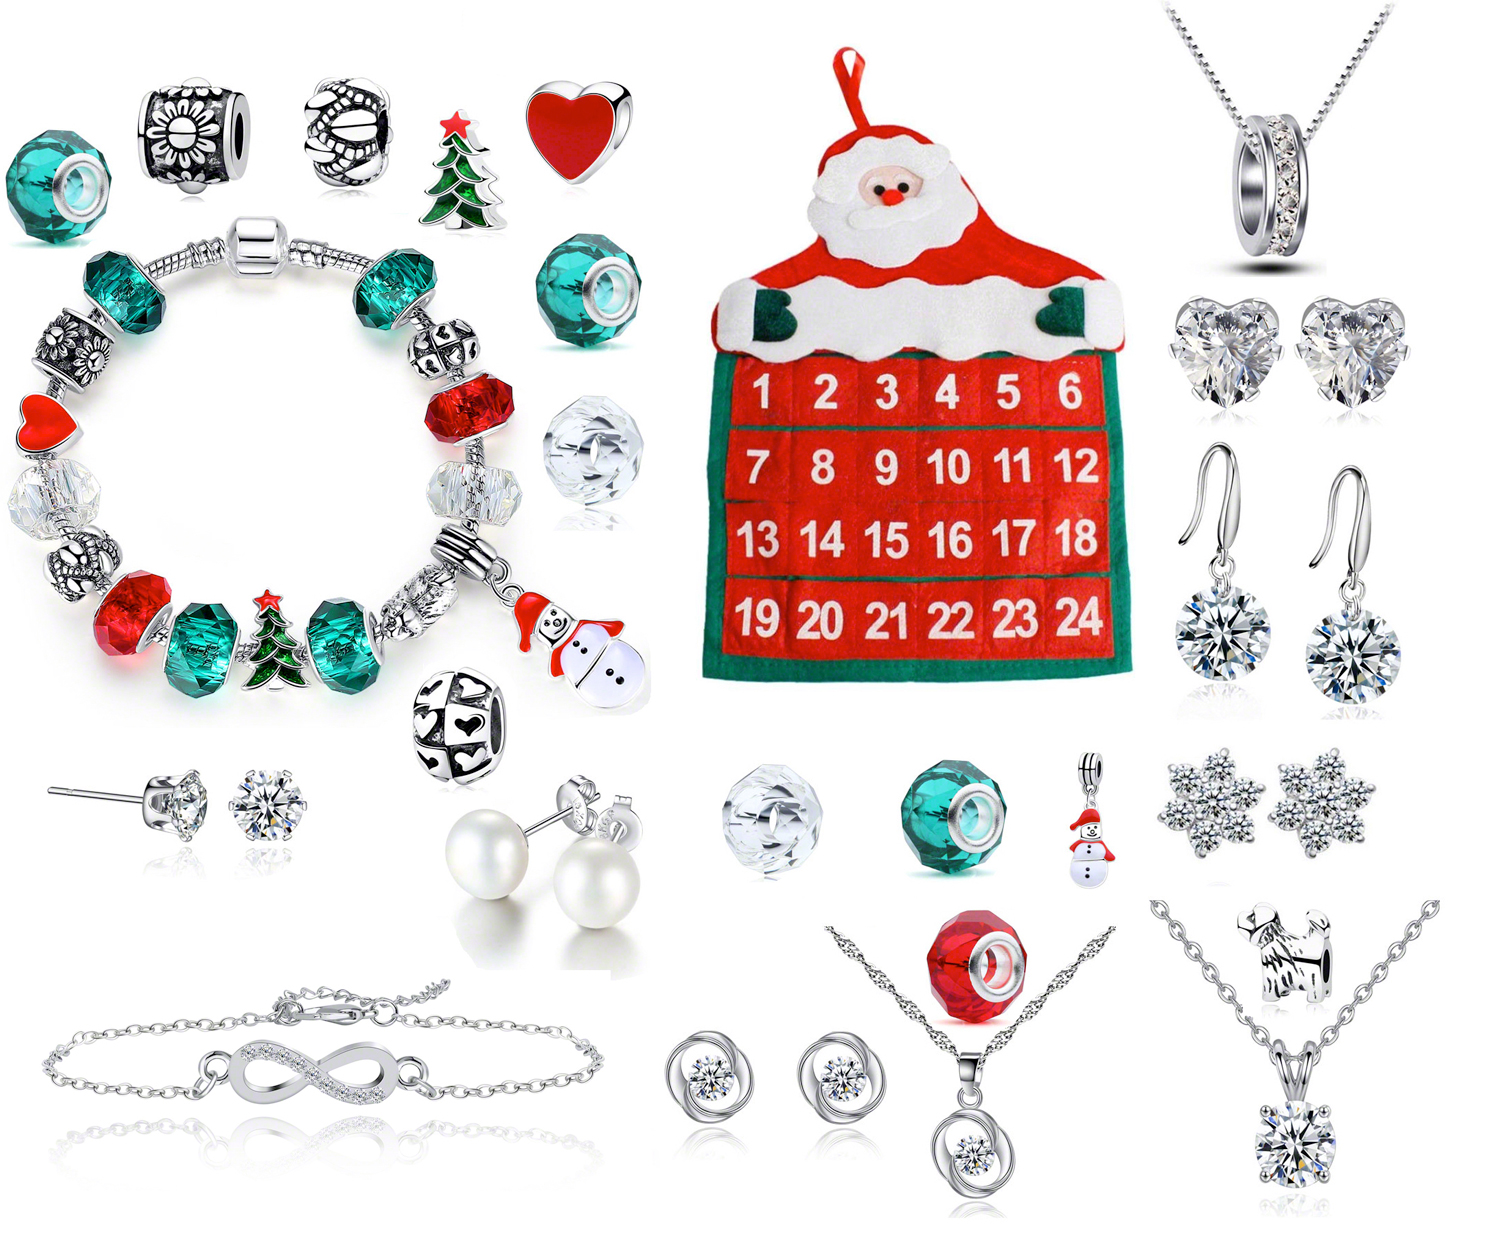 Large jewellery advent calendar 25 piece with crystals from swarovski